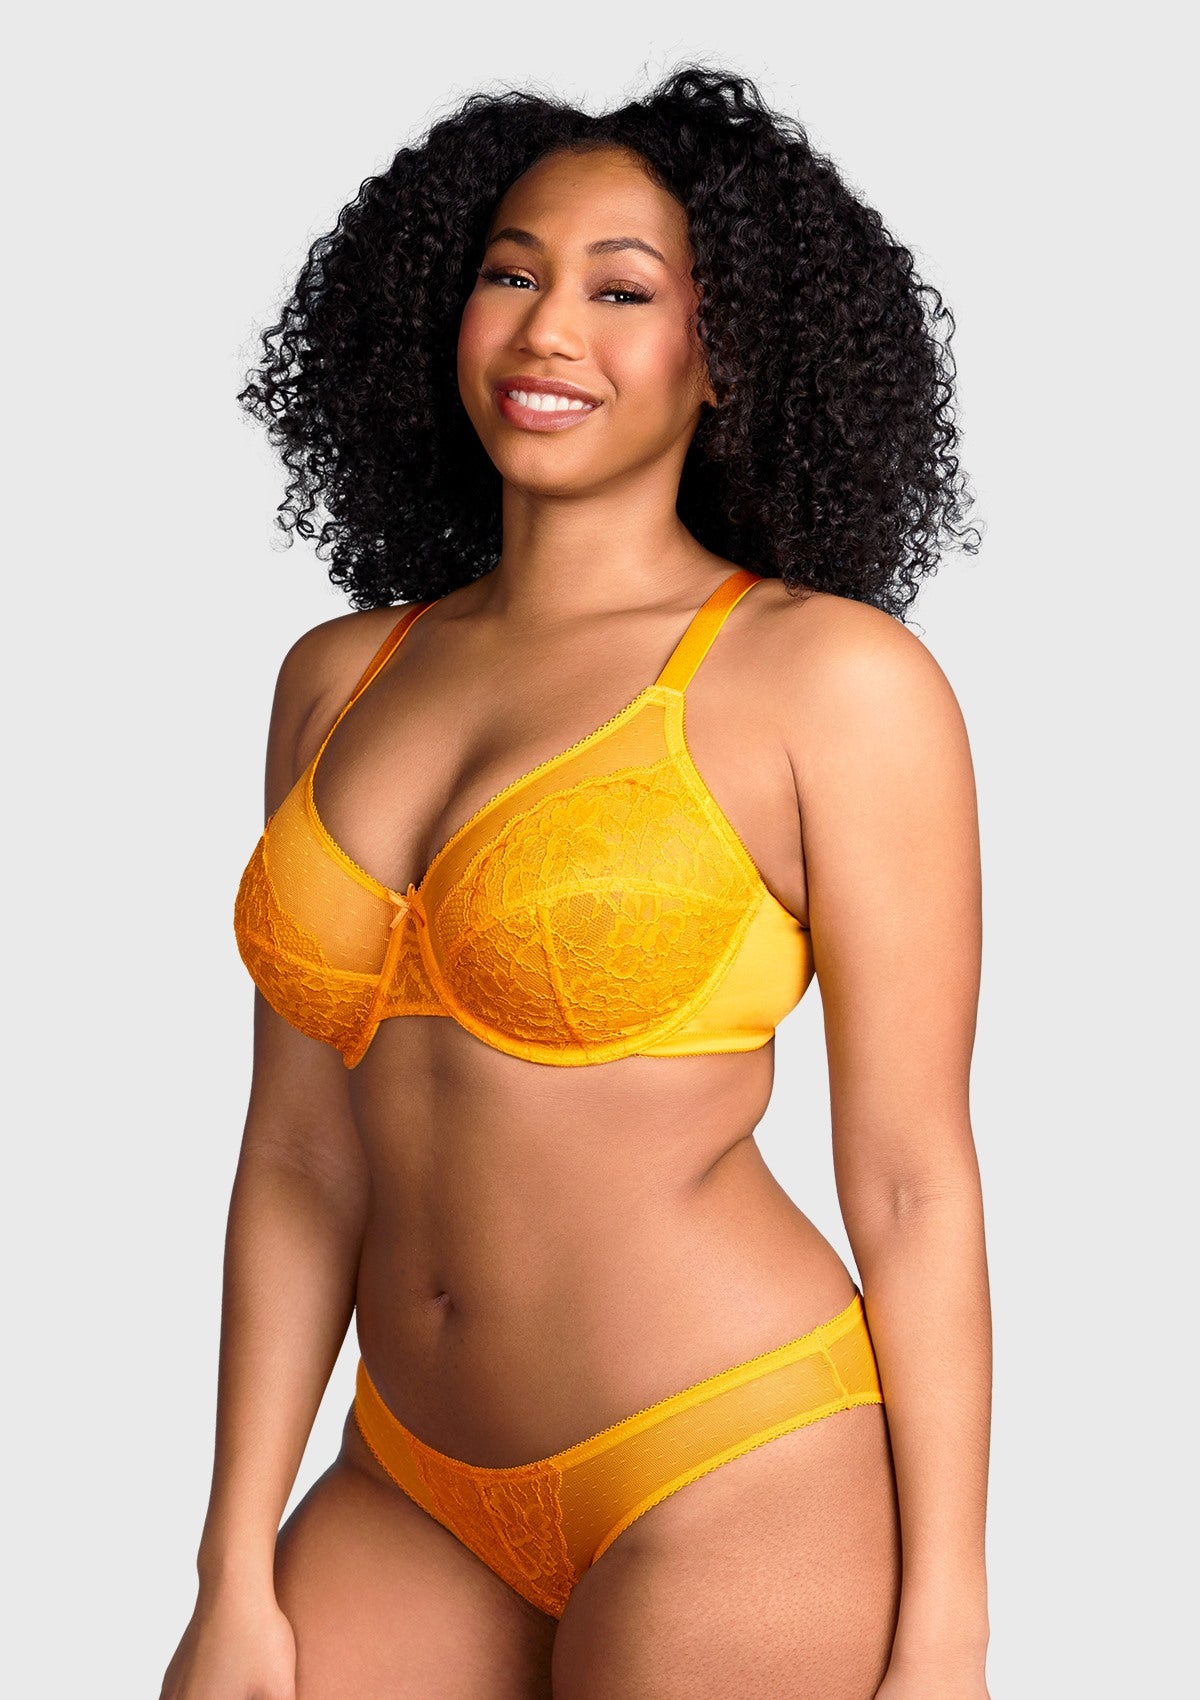 Enchante - Yellow Unlined Underwire Lace Minimizer Bra , HSIA - Cadmium Yellow / 38 / D